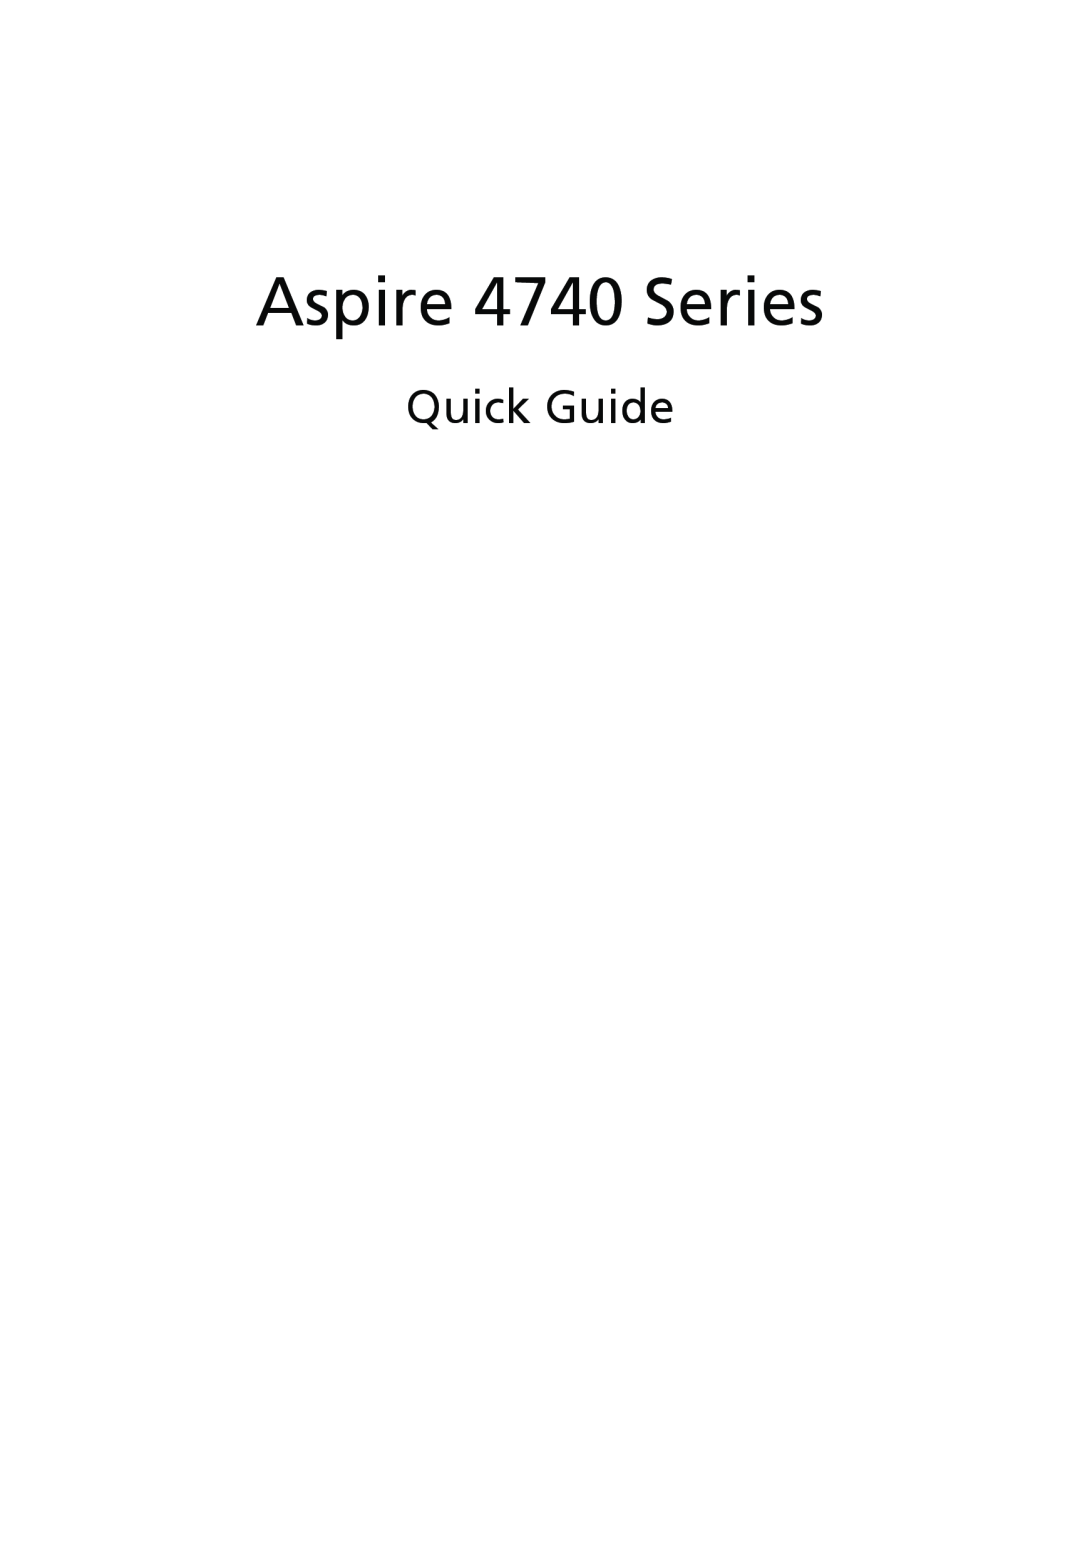 Acer manual Quick Guide, Aspire 4740 Series 